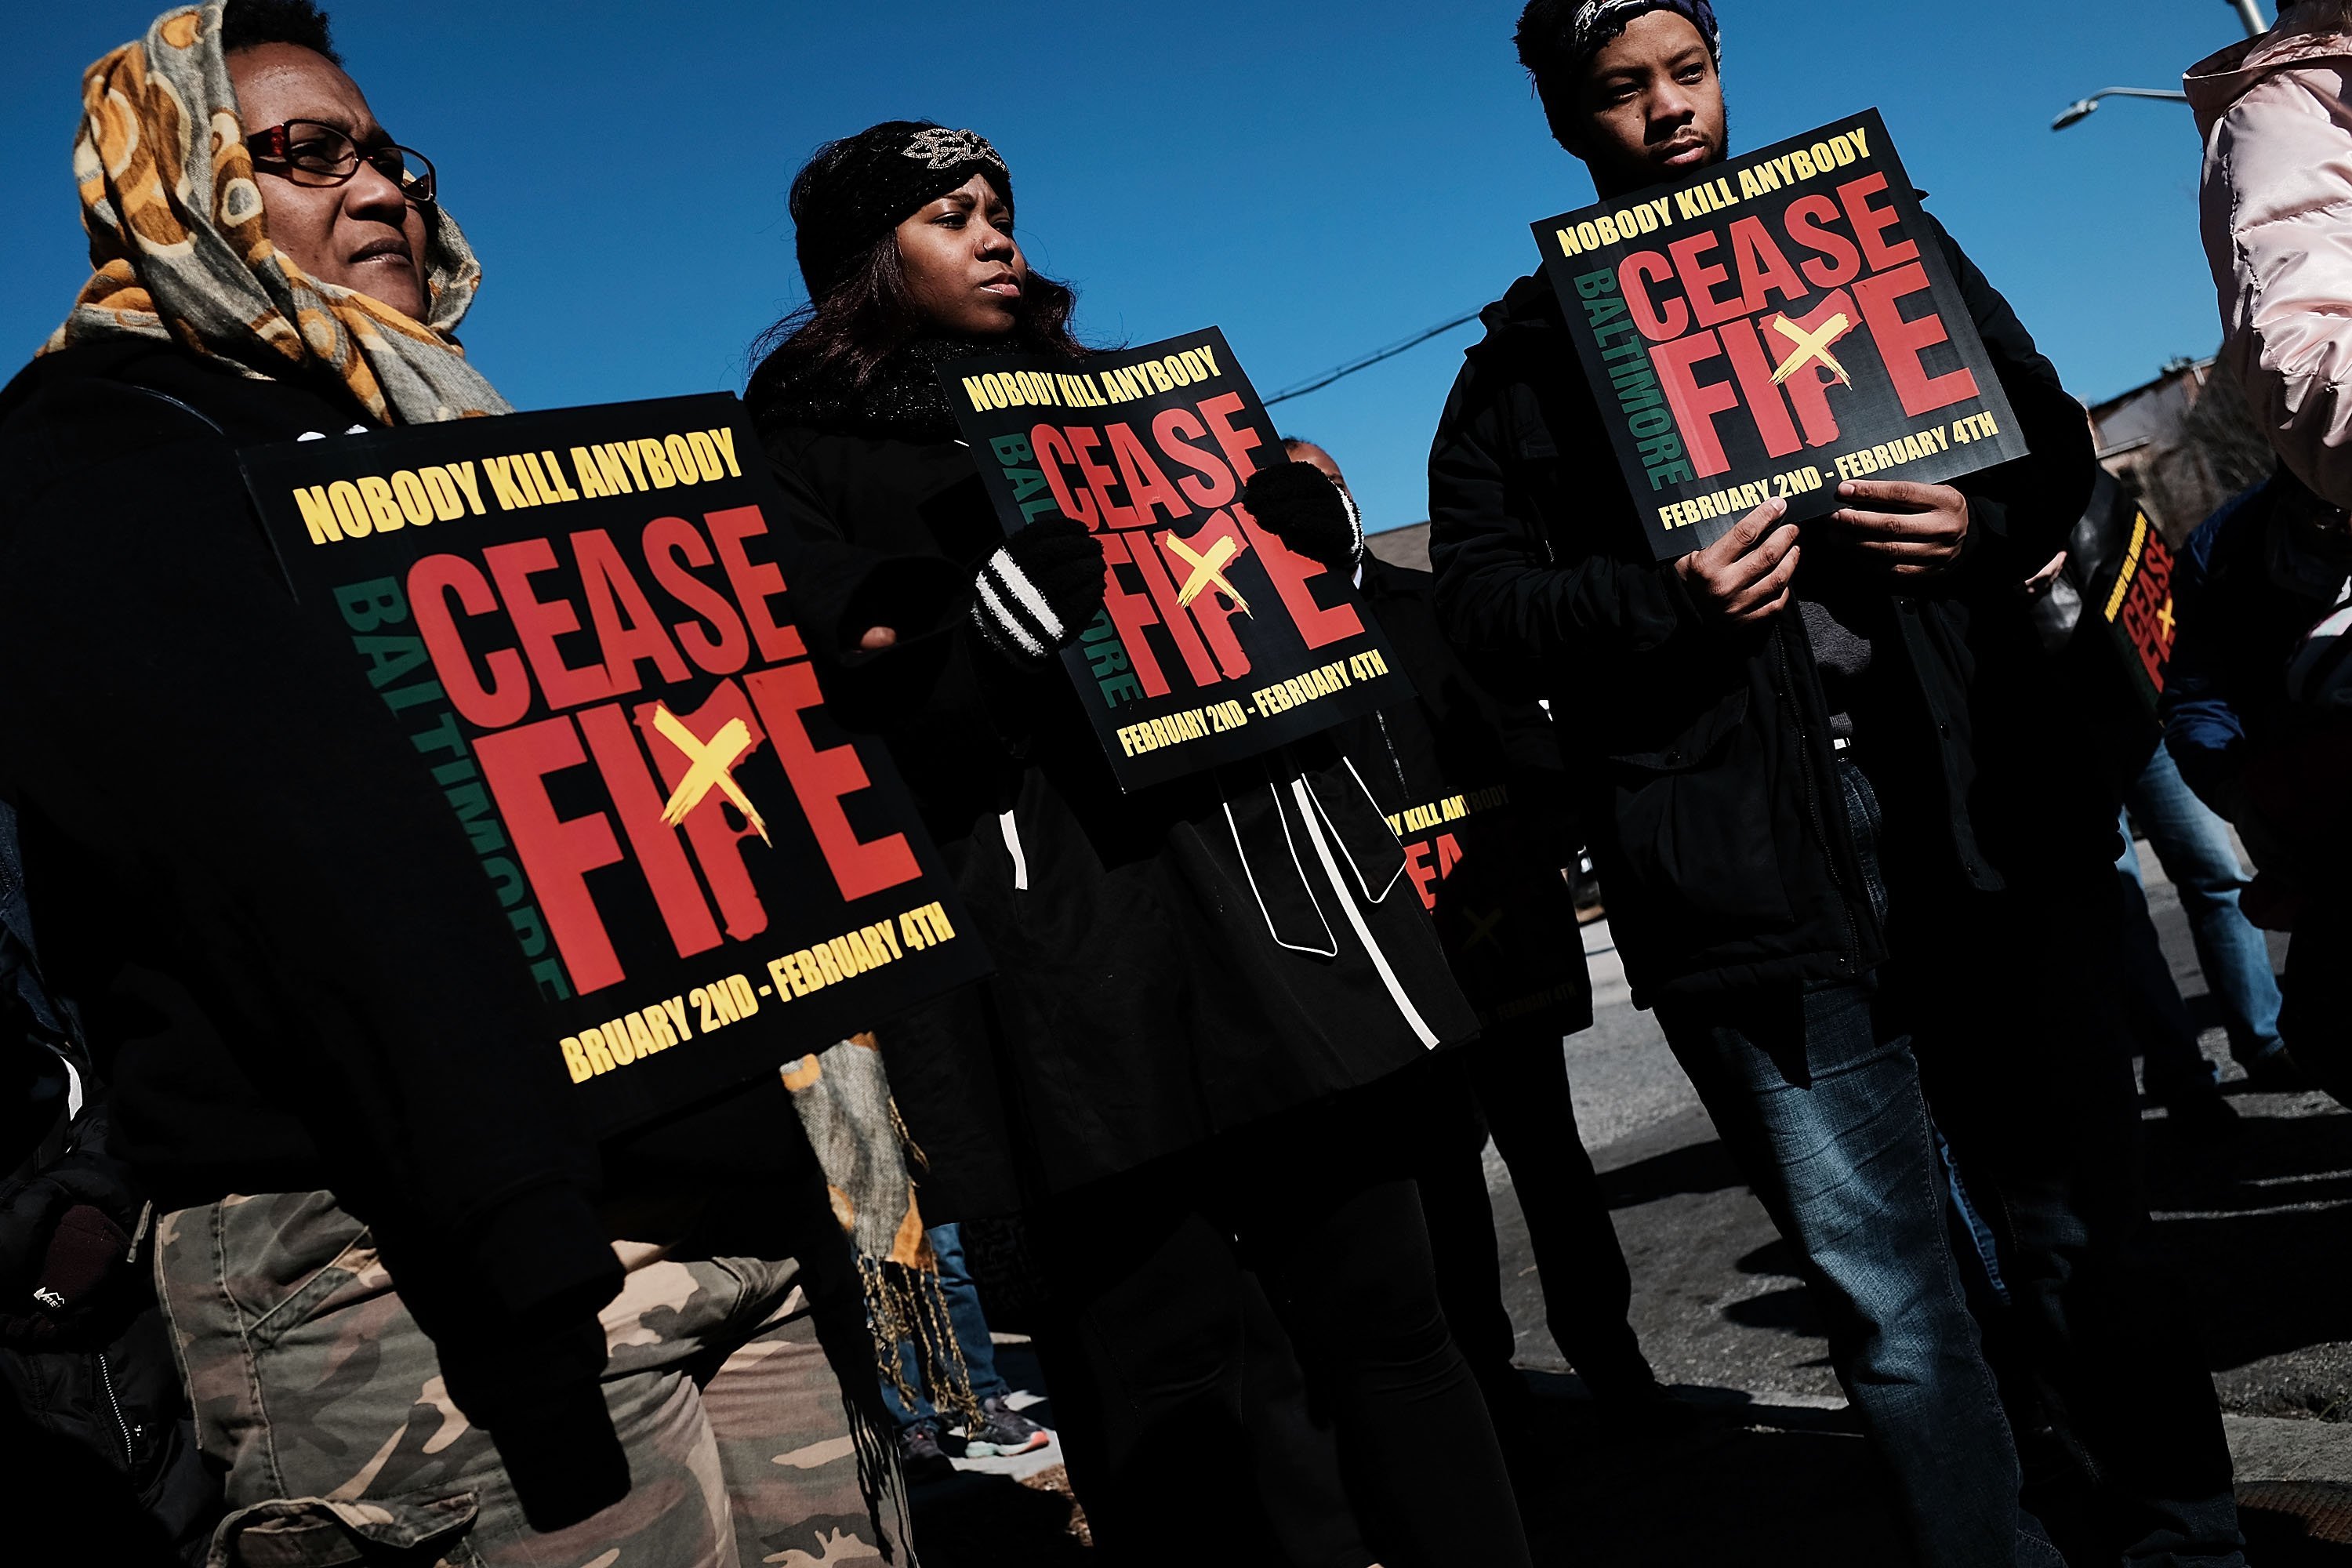 Activists and residents participate in a "Peace and Healing Walk" in an area with a high rate of homicides in Baltimore on February 3, 2018.